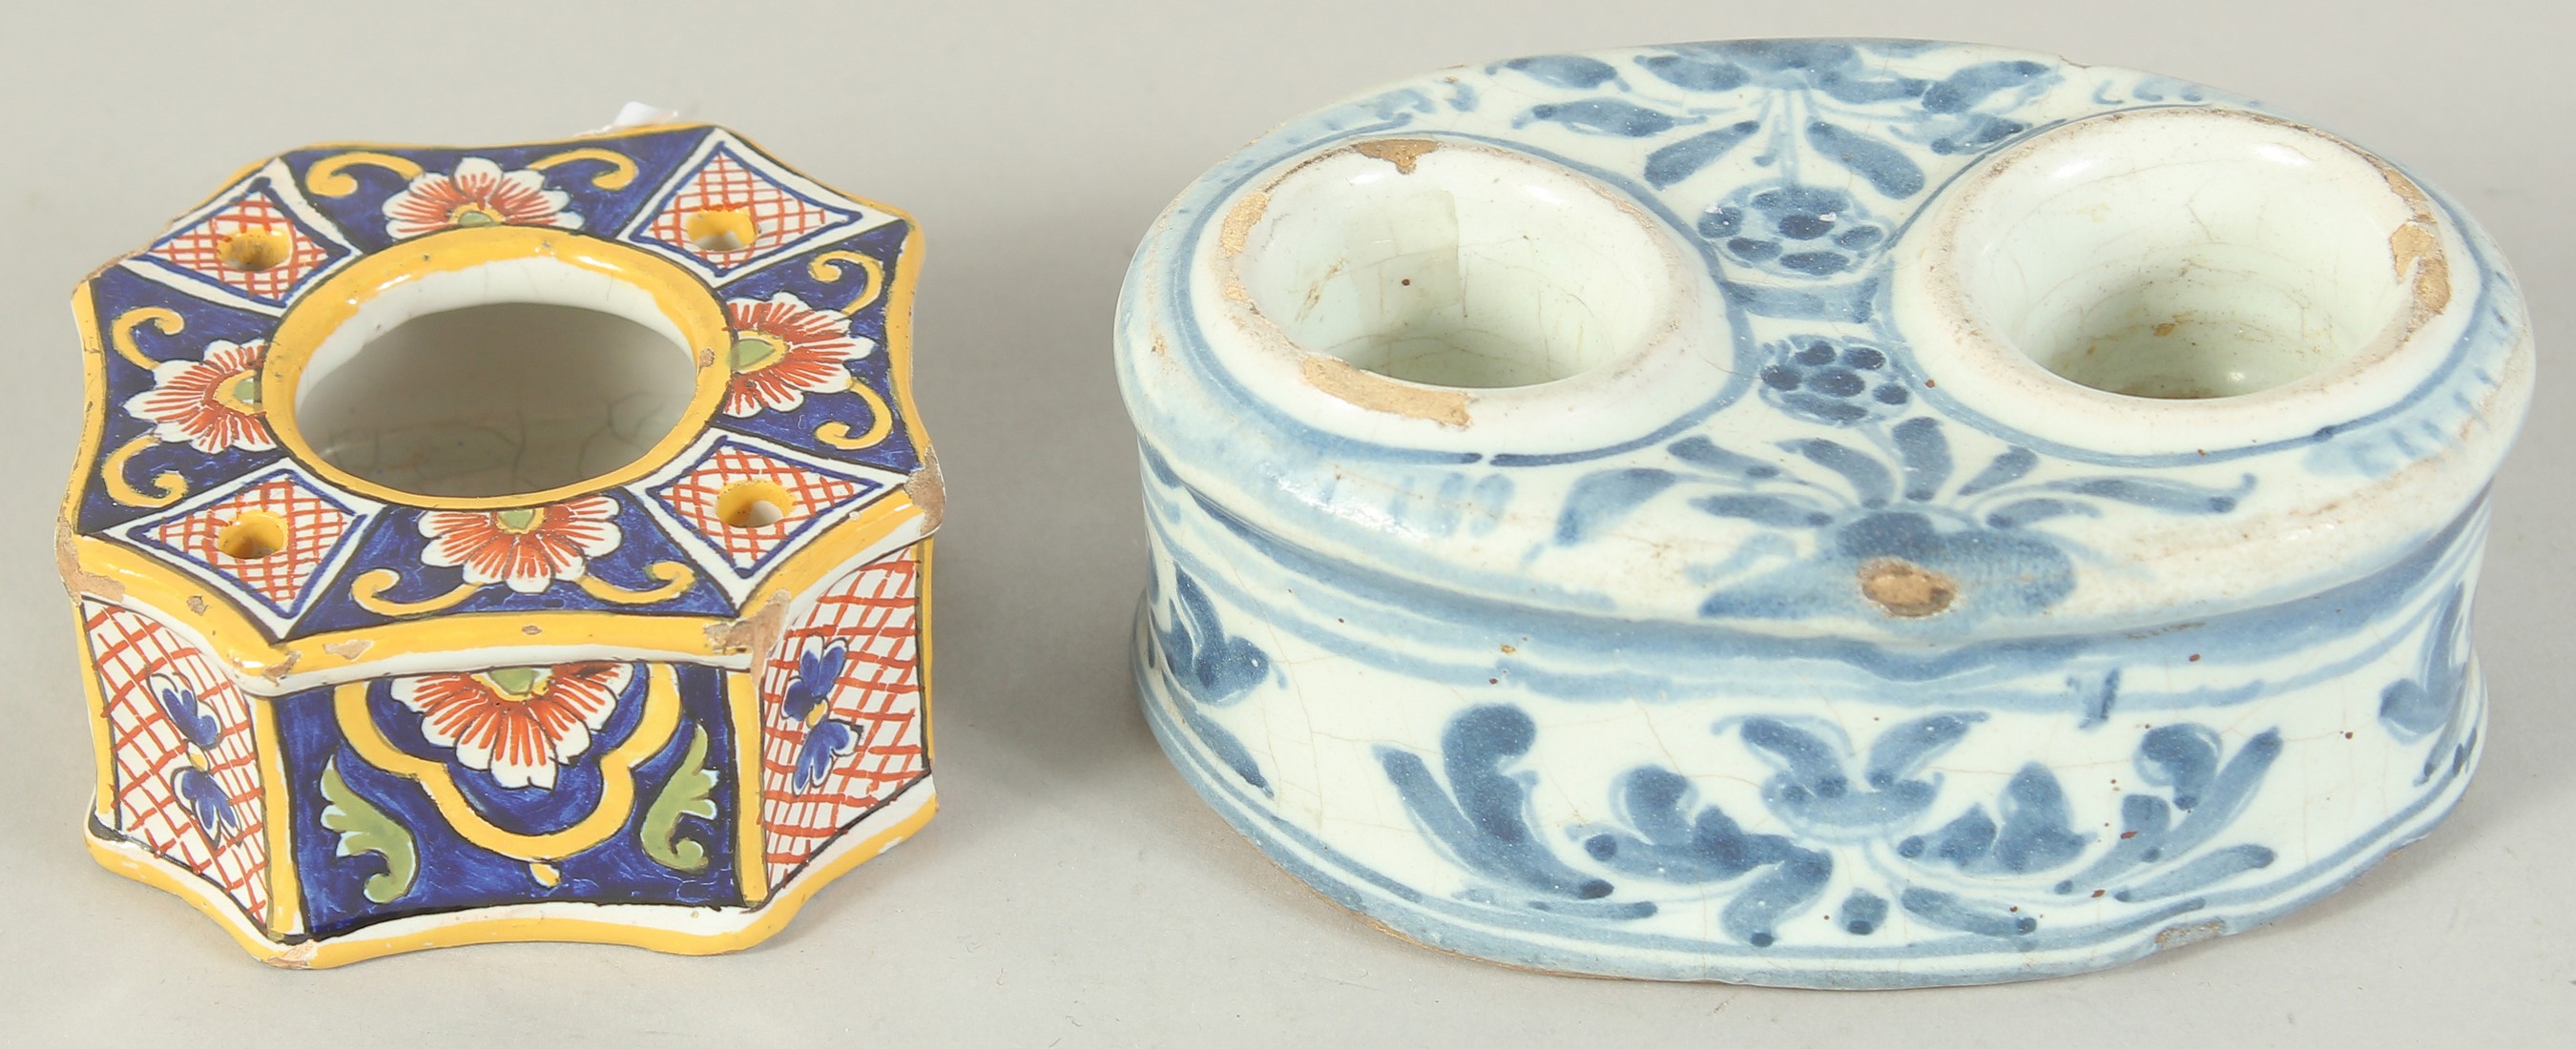 TWO FAIENCE TIN GLAZE INK POTS, one blue and white with two ink pots, the other coloured with one